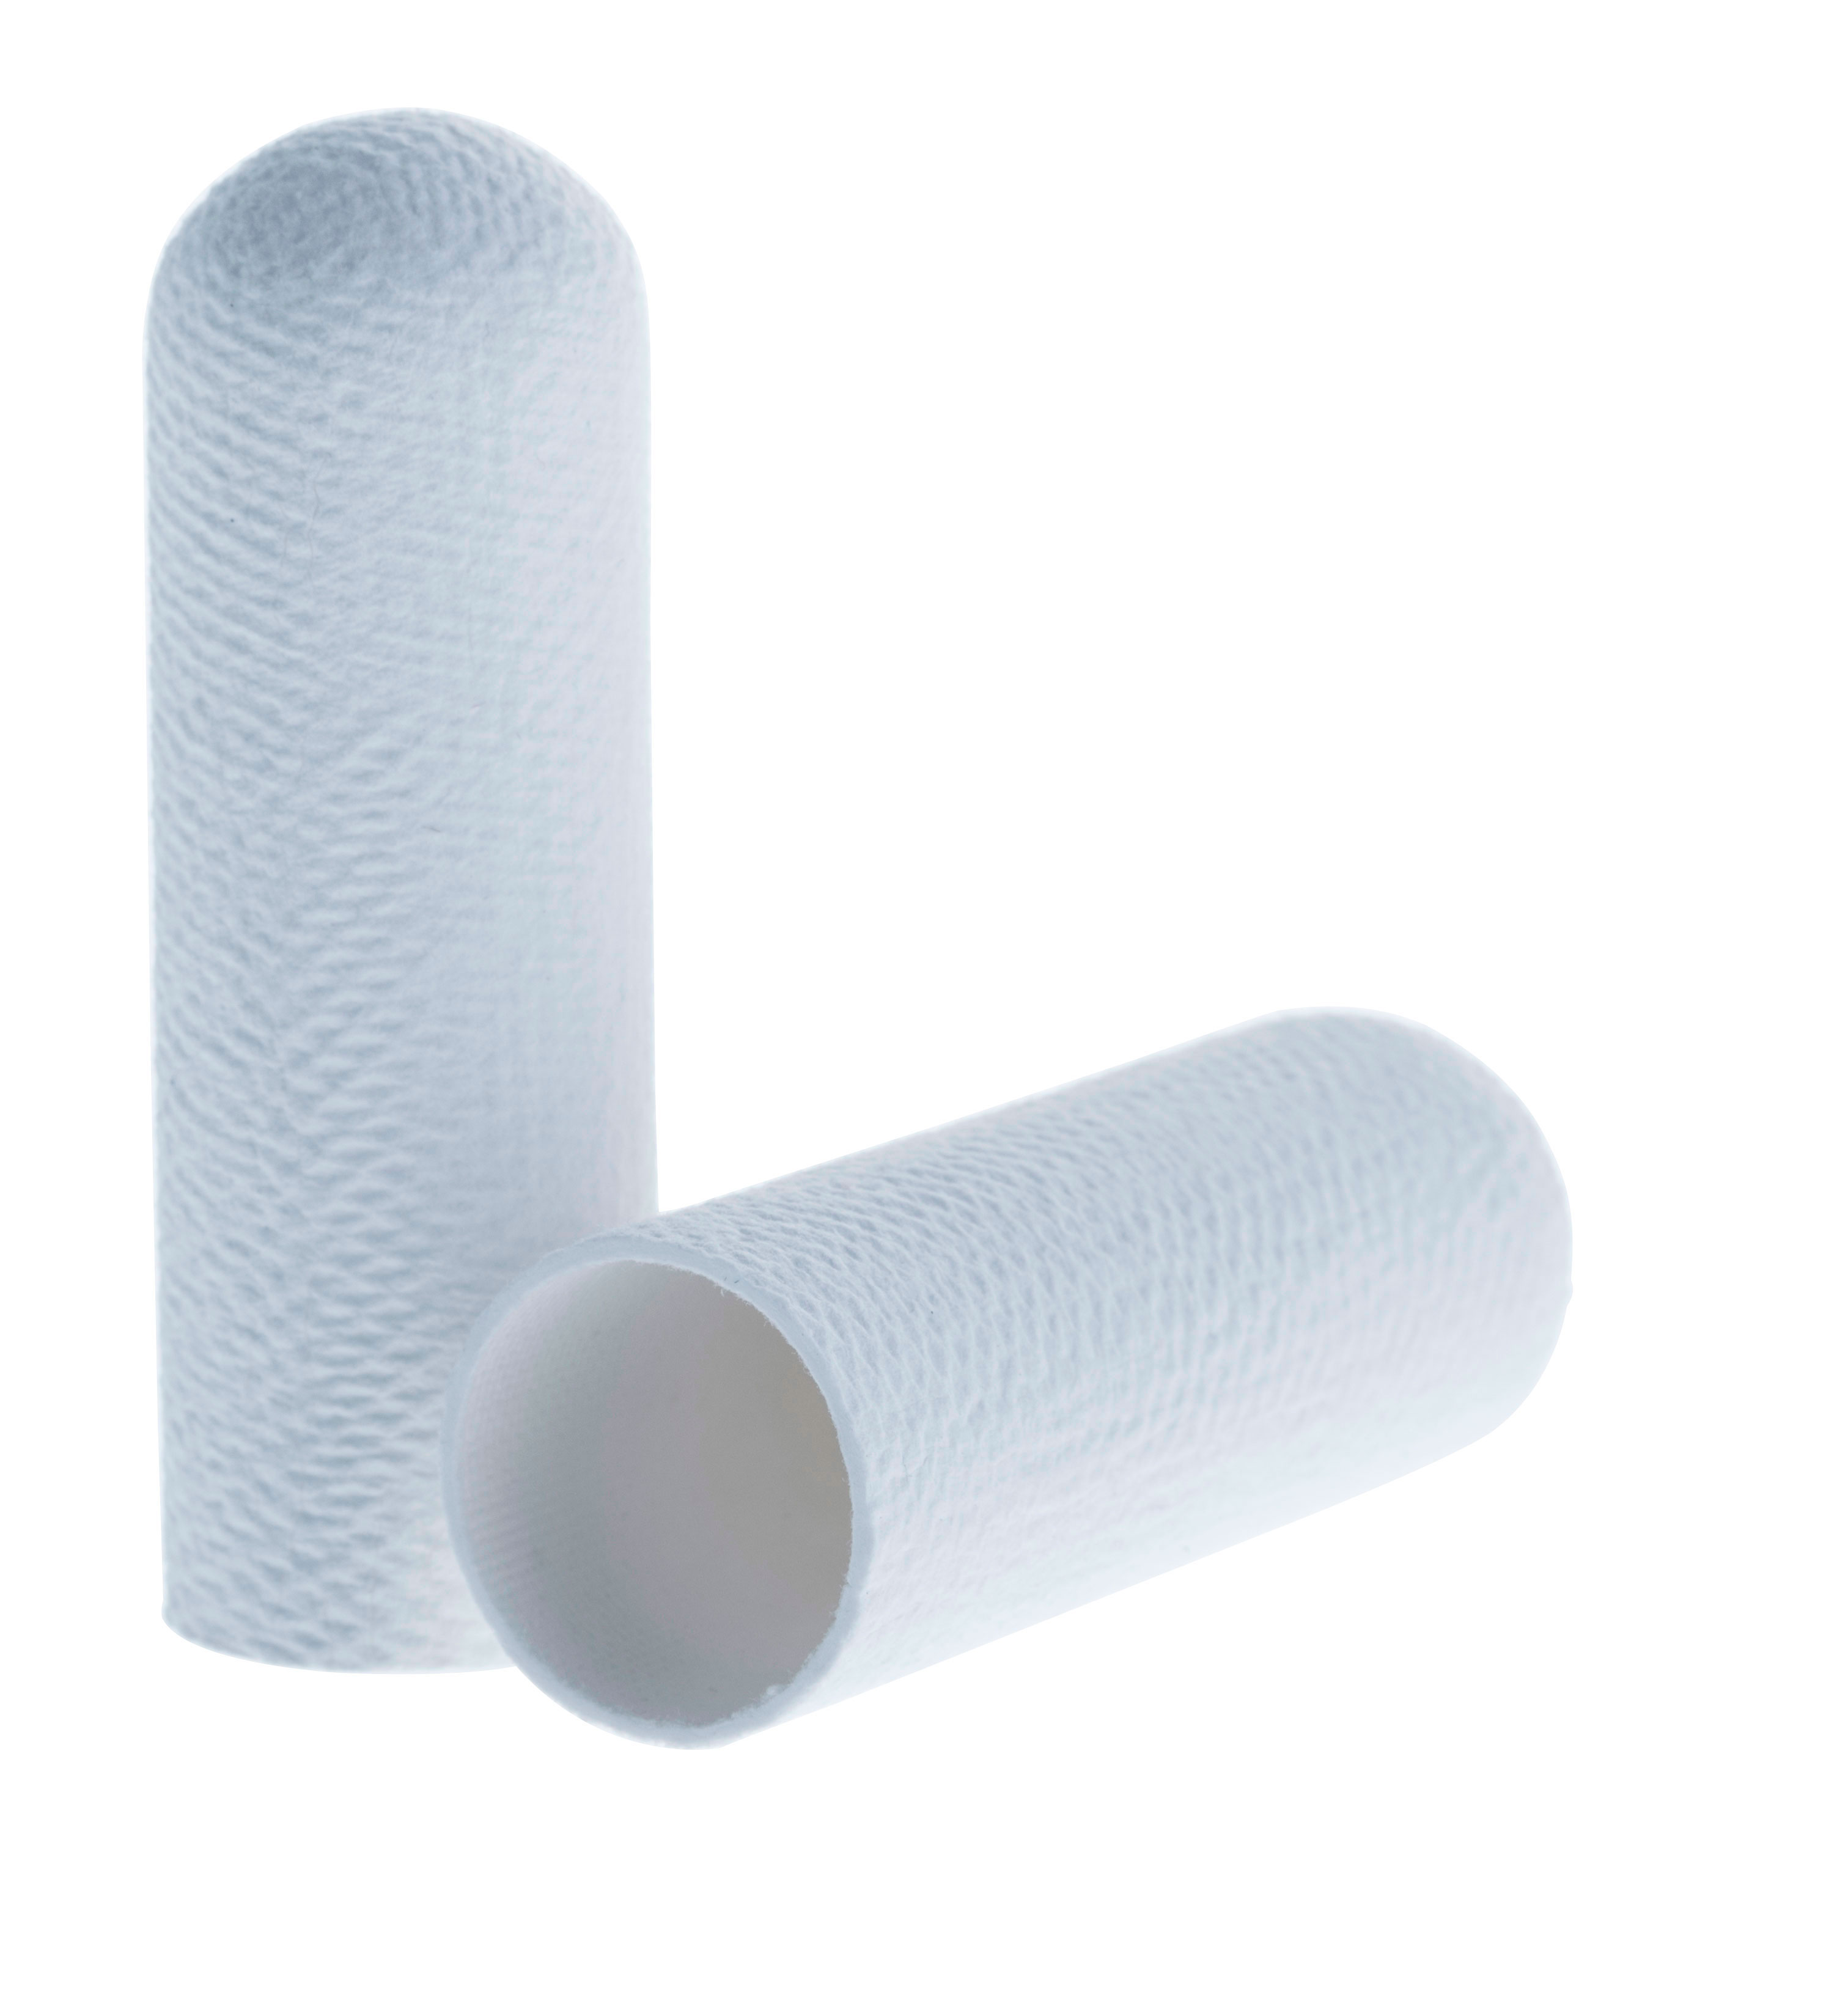 Cellulose extraction thimbles for Soxhlet extraction. SCHARLAU. Standard cellulose cartridge. Dim. Øxlength: 33x100mm. Particle retention in liquid: Nom. 8-15 microns